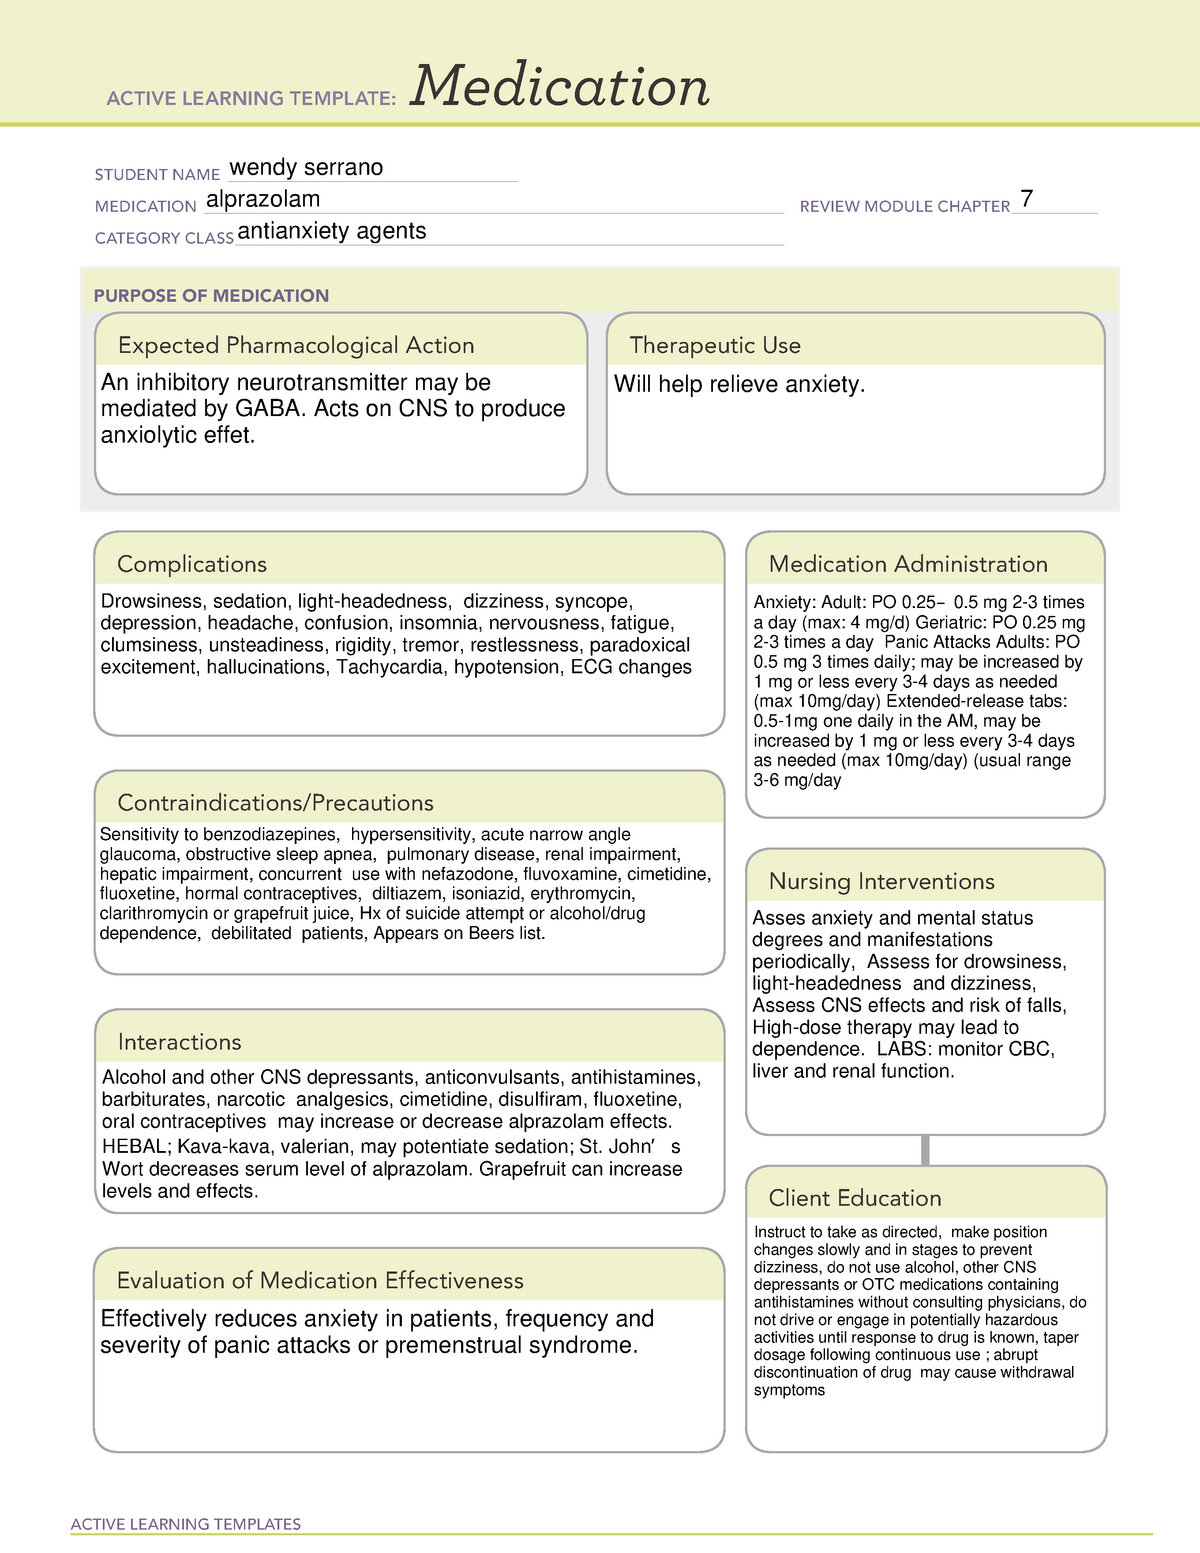 ATI Medication Template 15 ACTIVE LEARNING TEMPLATES Medication 